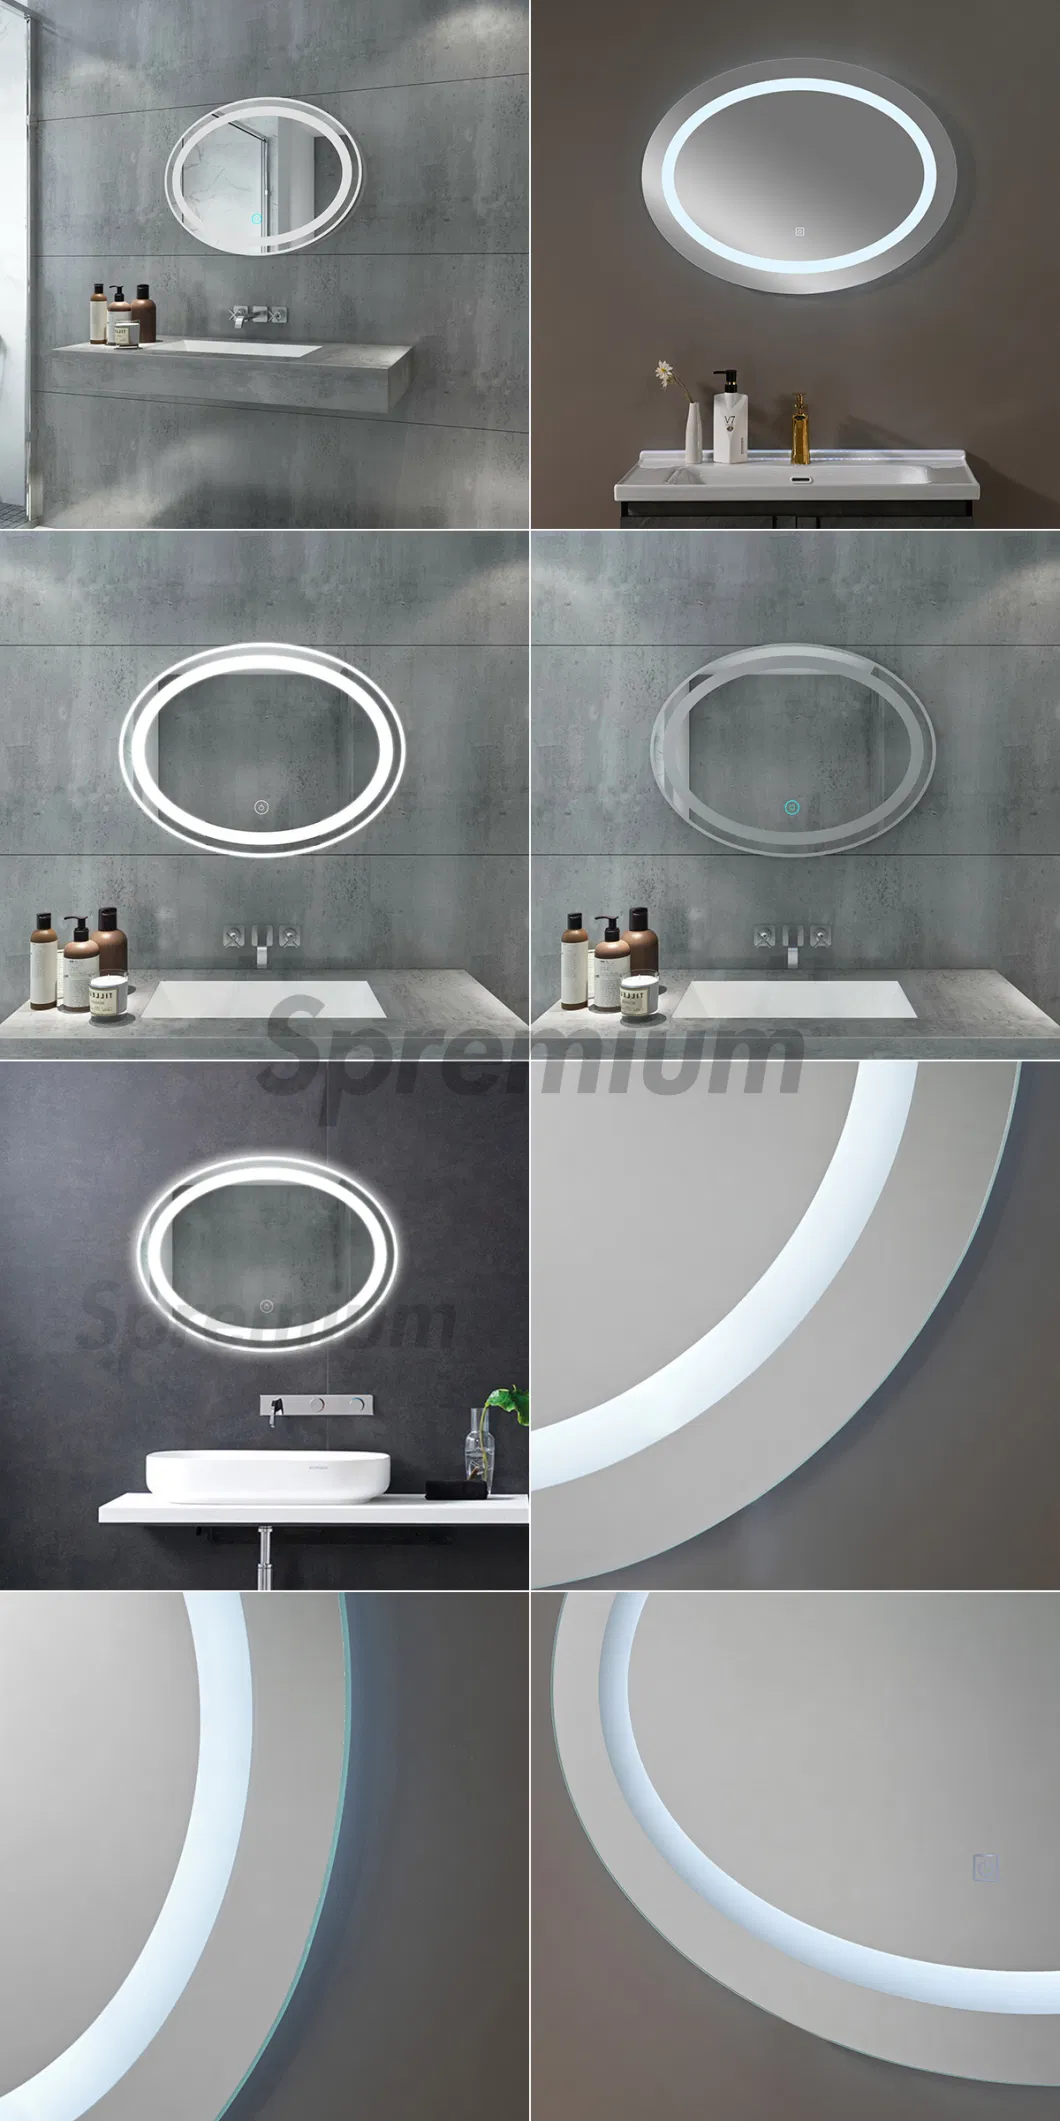 Defogging Contemporary Wall Electronic Miroir Smart LED Bathroom Mirror Oval Frameless Backlit Mirrors Touch Switch